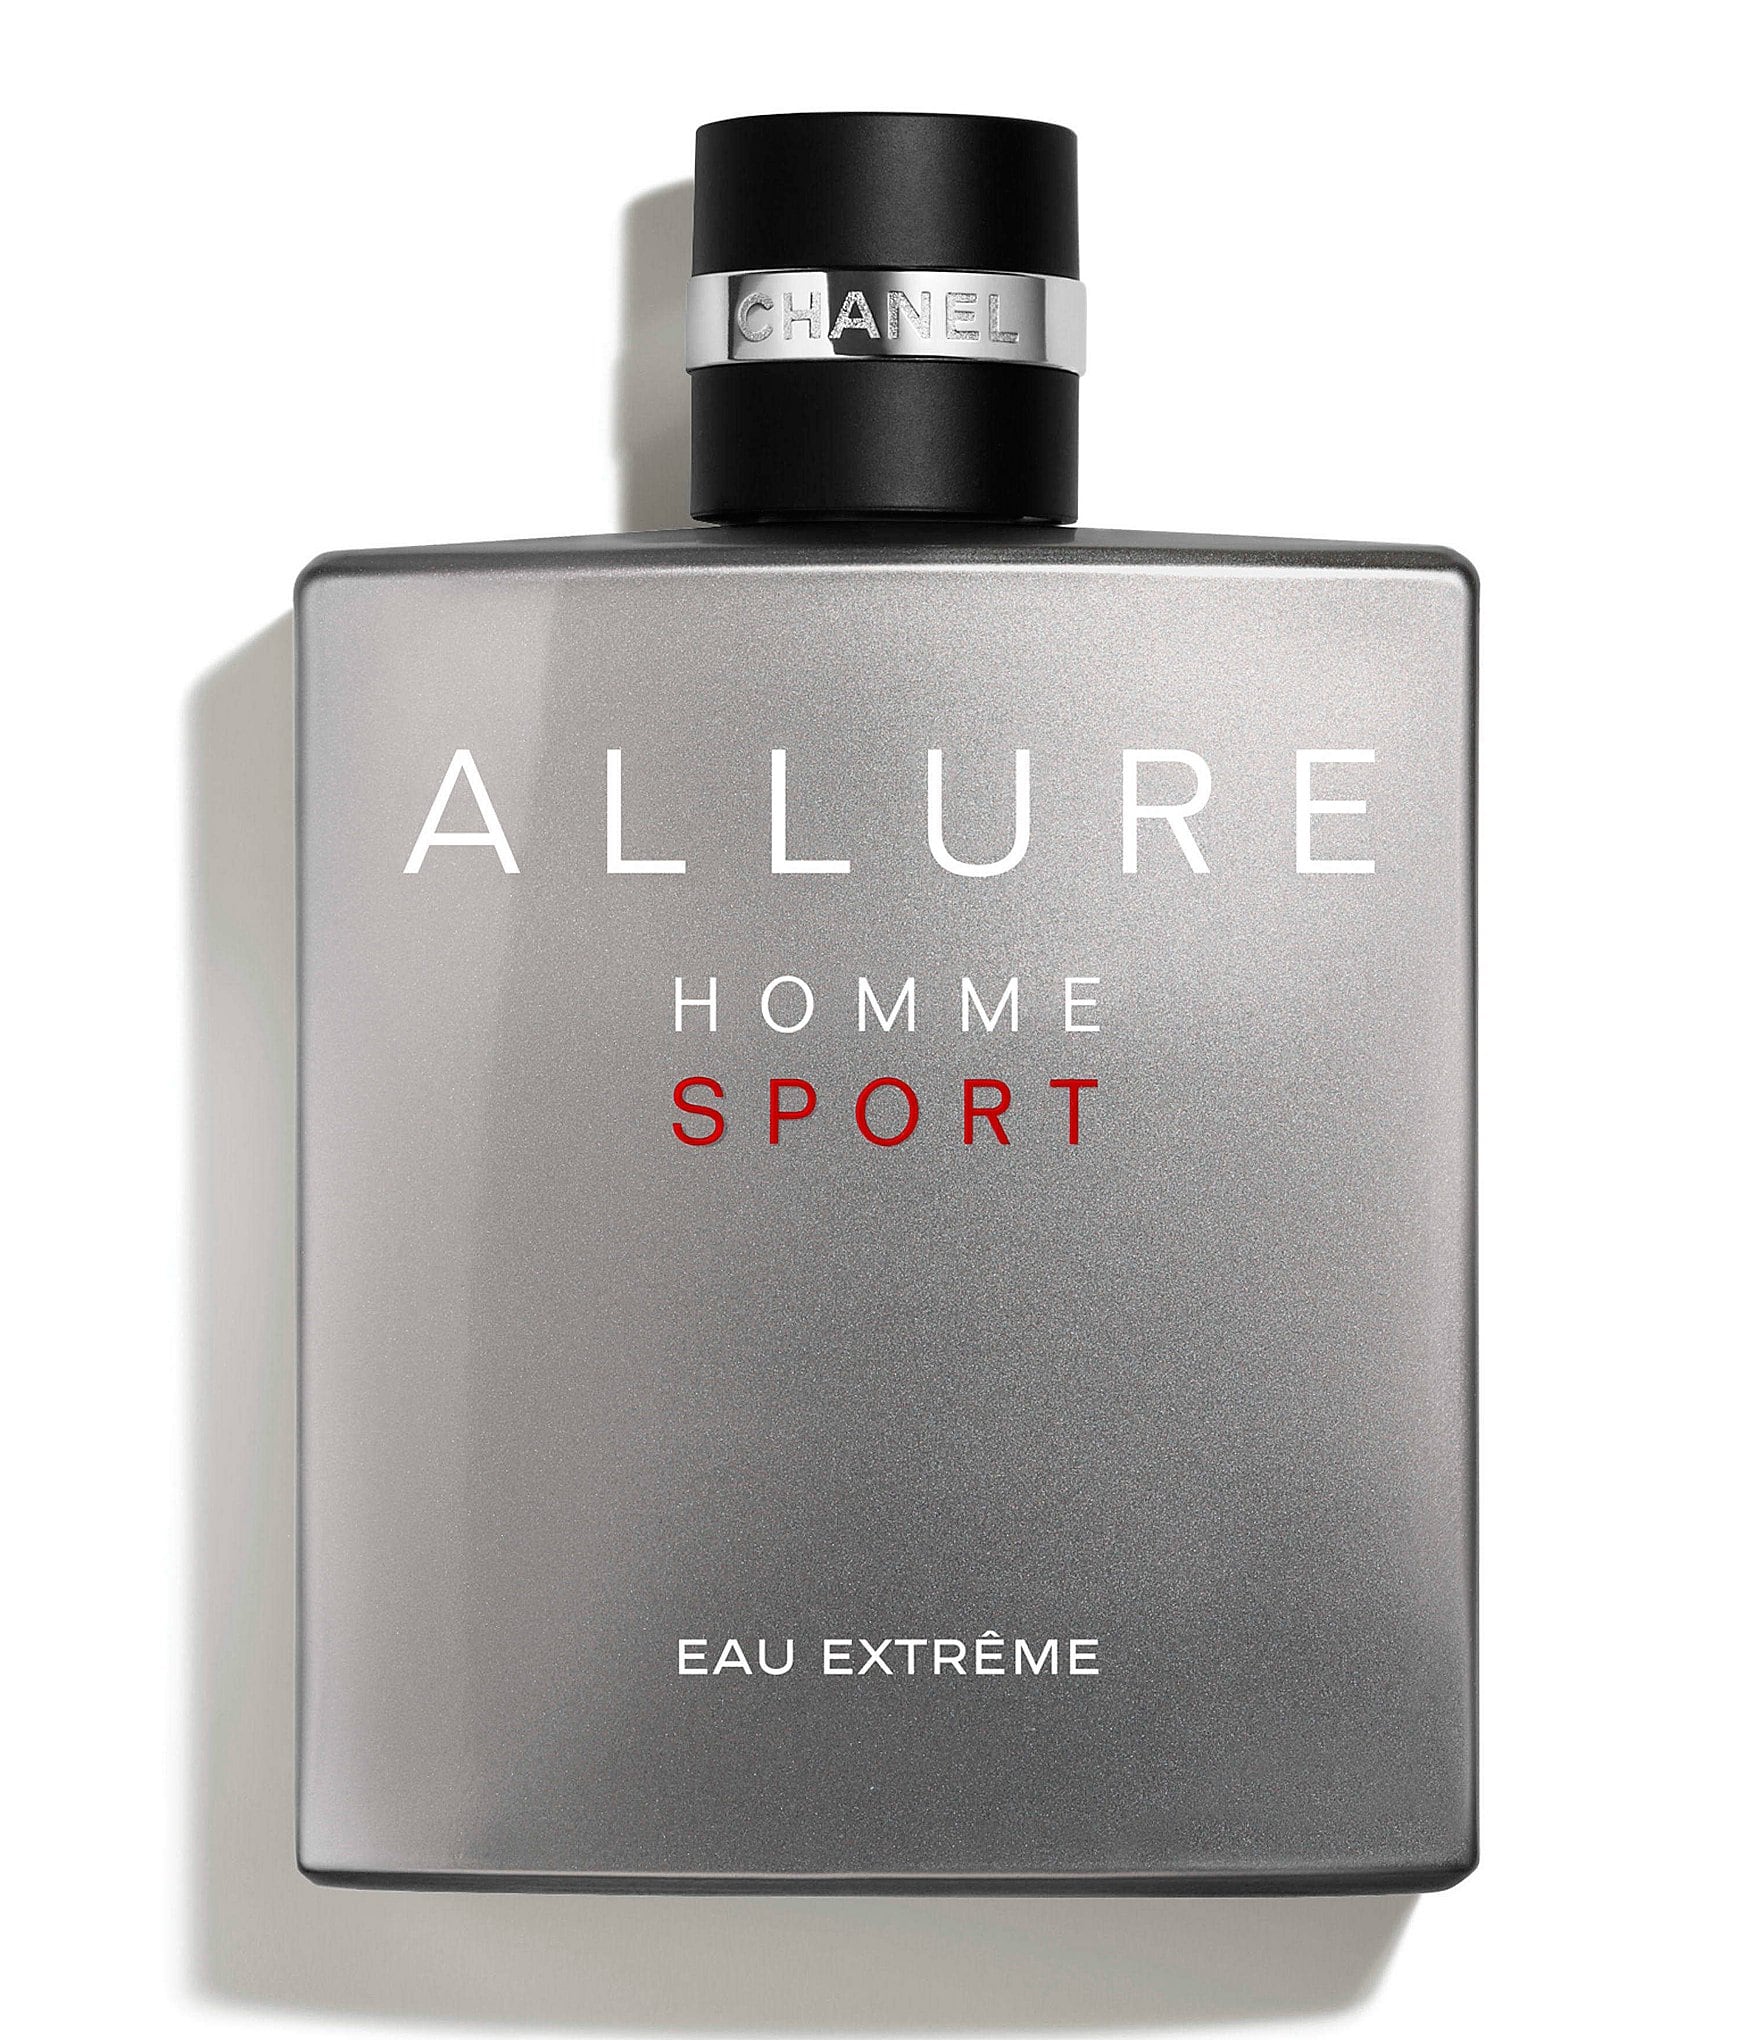 Chanel Allure Homme Sport Eau Extreme Fragrance Review #cologne #mensf